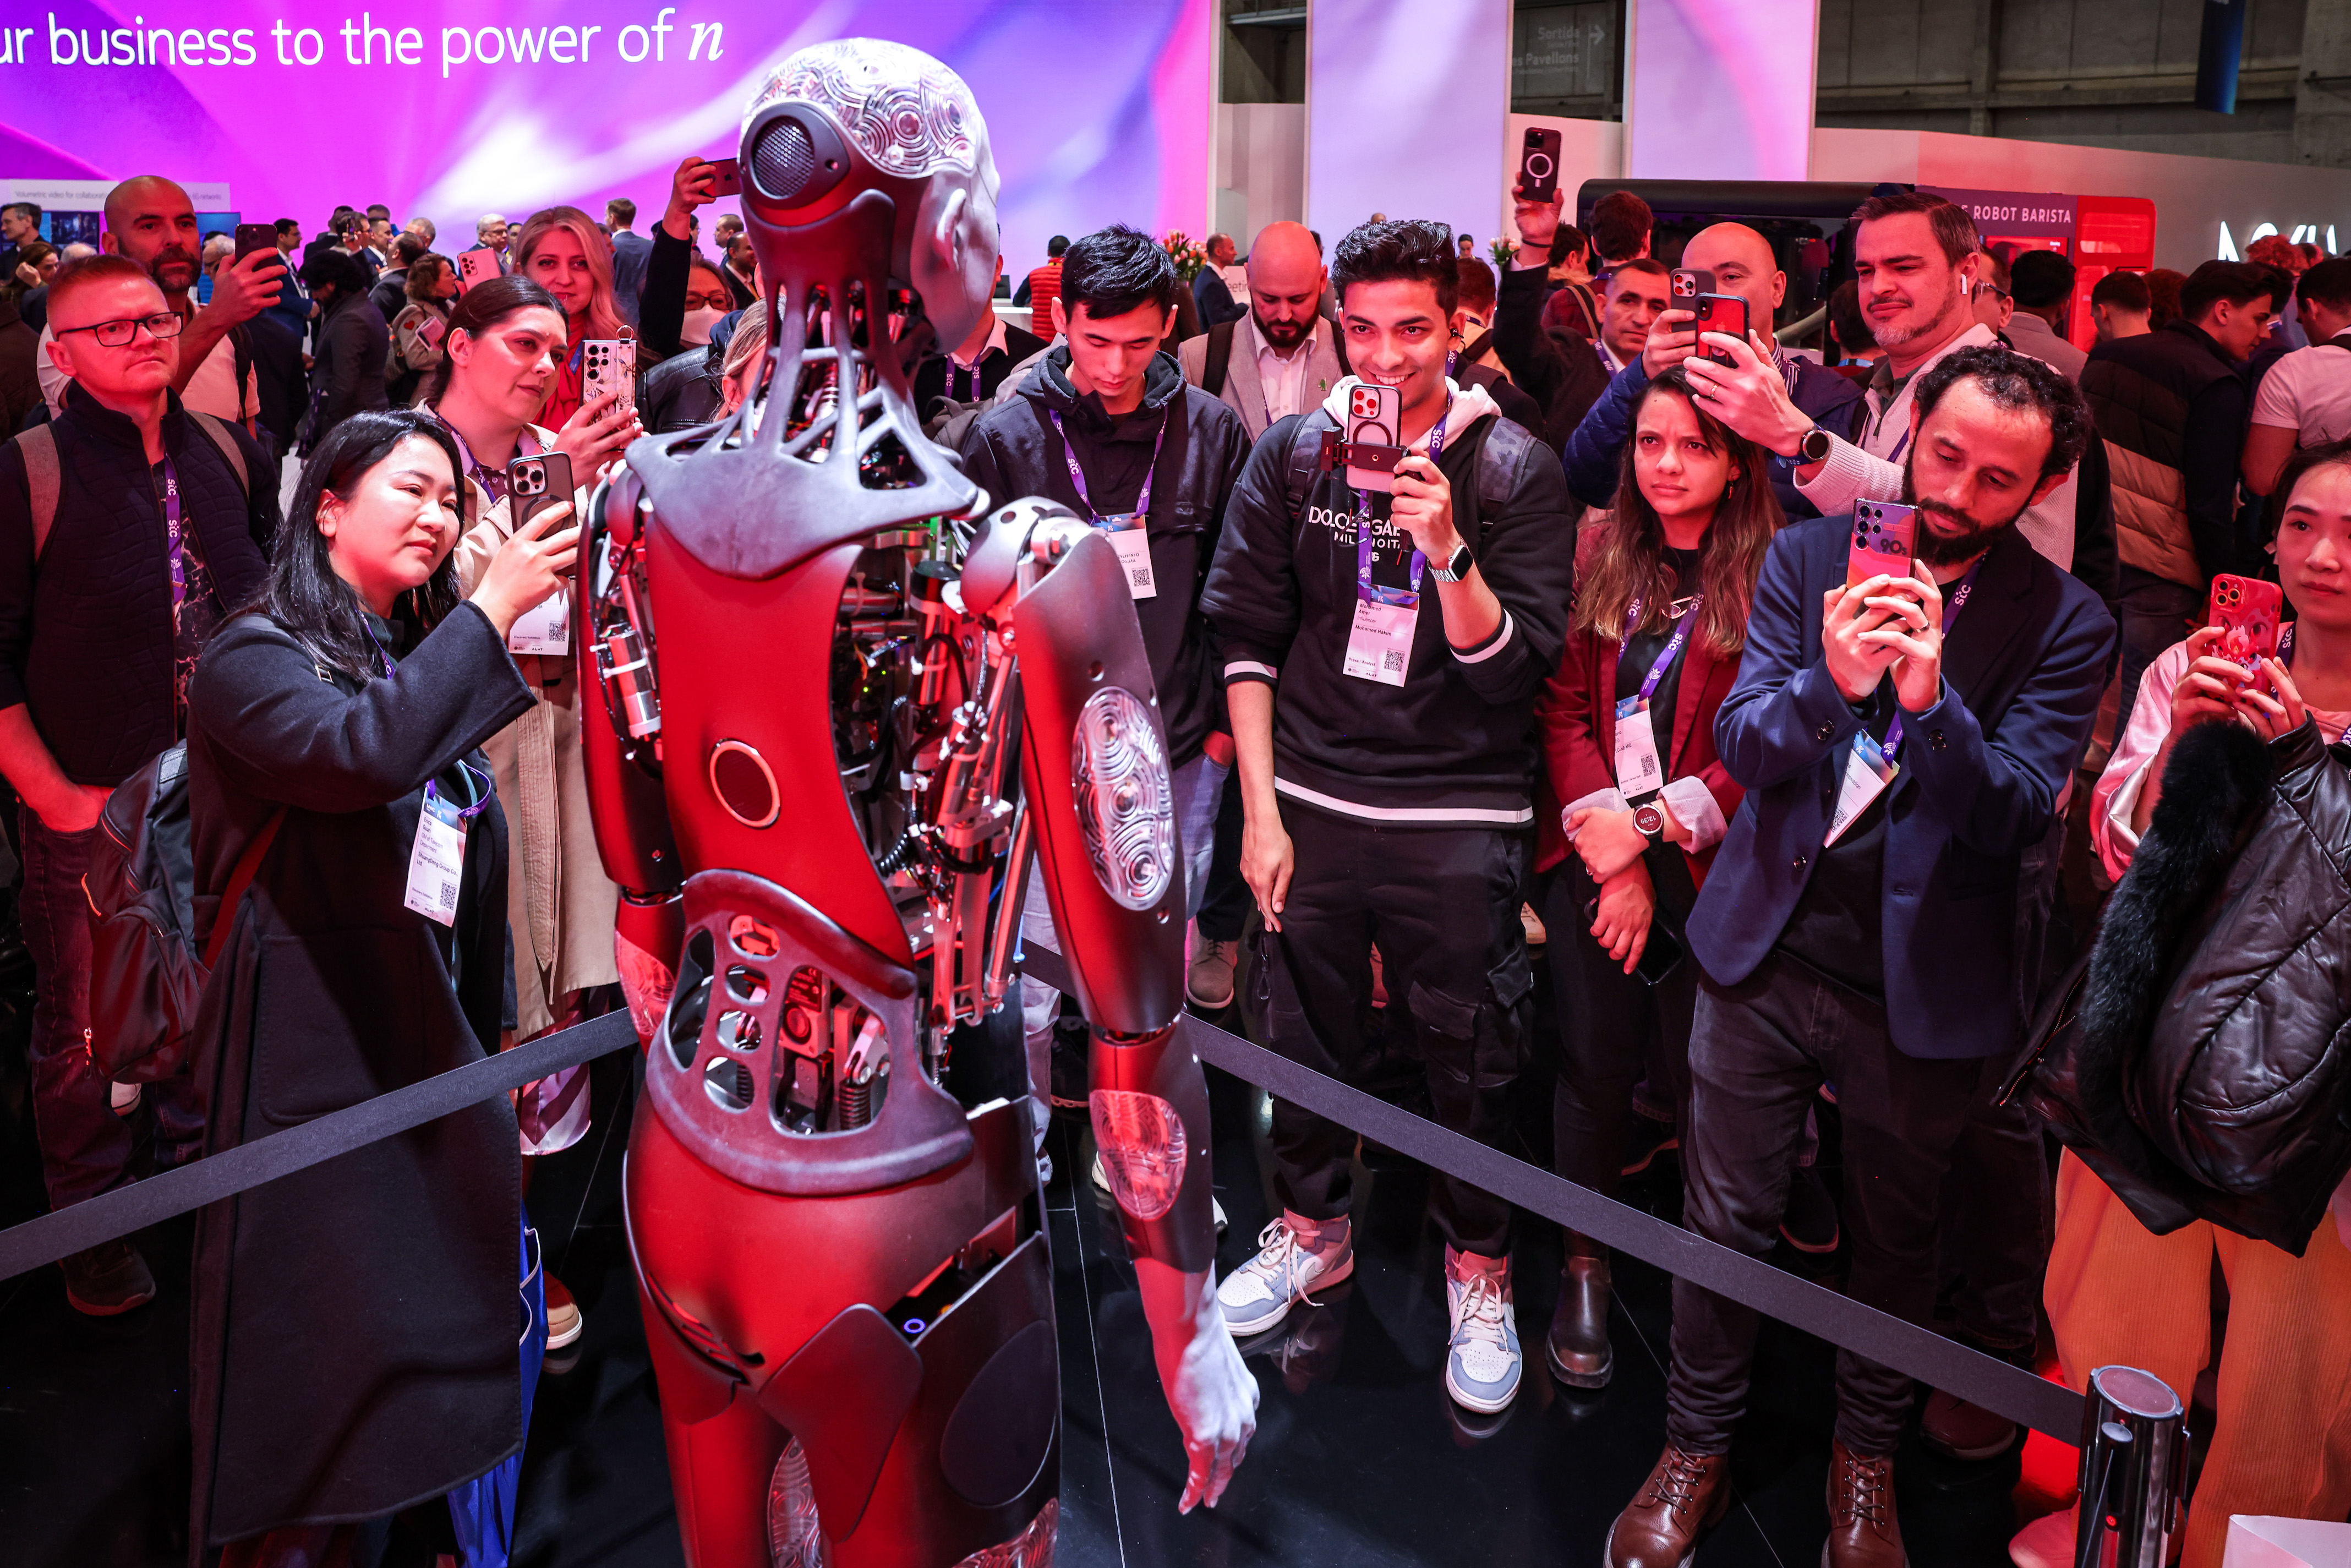 Attendees take pictures of a robot at Mobile World Congress